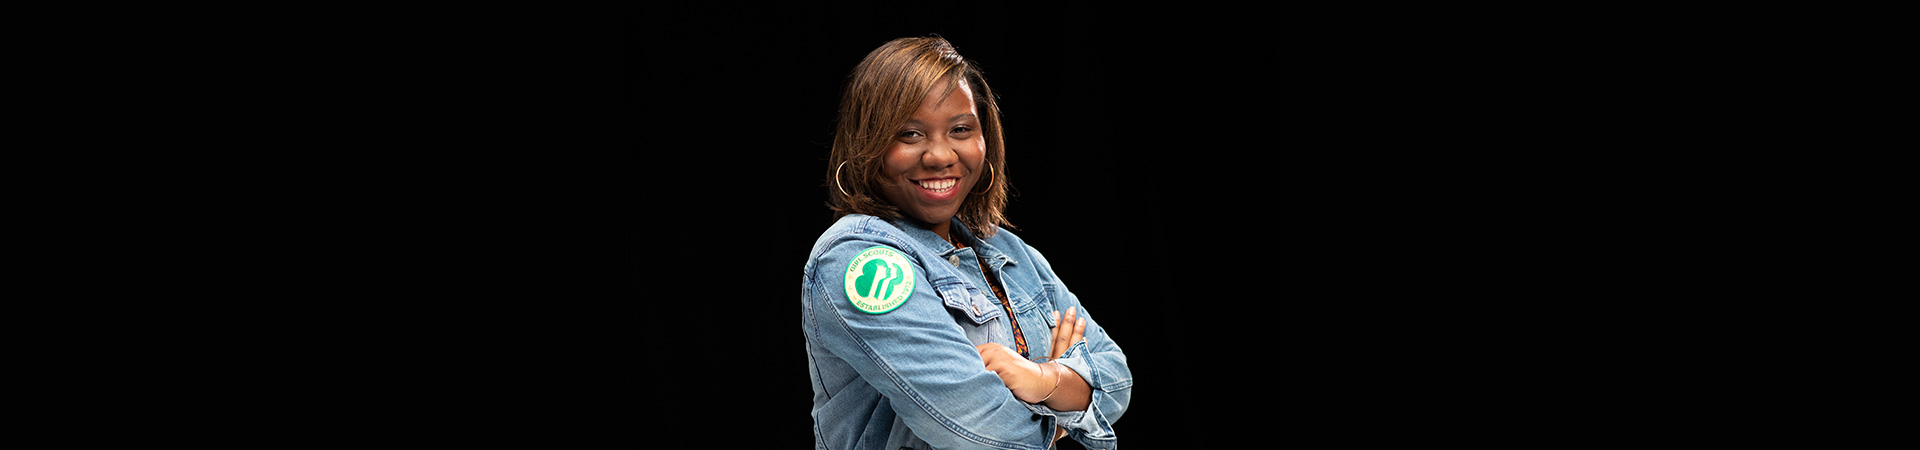  High school senior ambassador Girl Scout standing against black background and smiling at the camera - wearing a denim jacket with vintage Girl Scout profiles patch. 